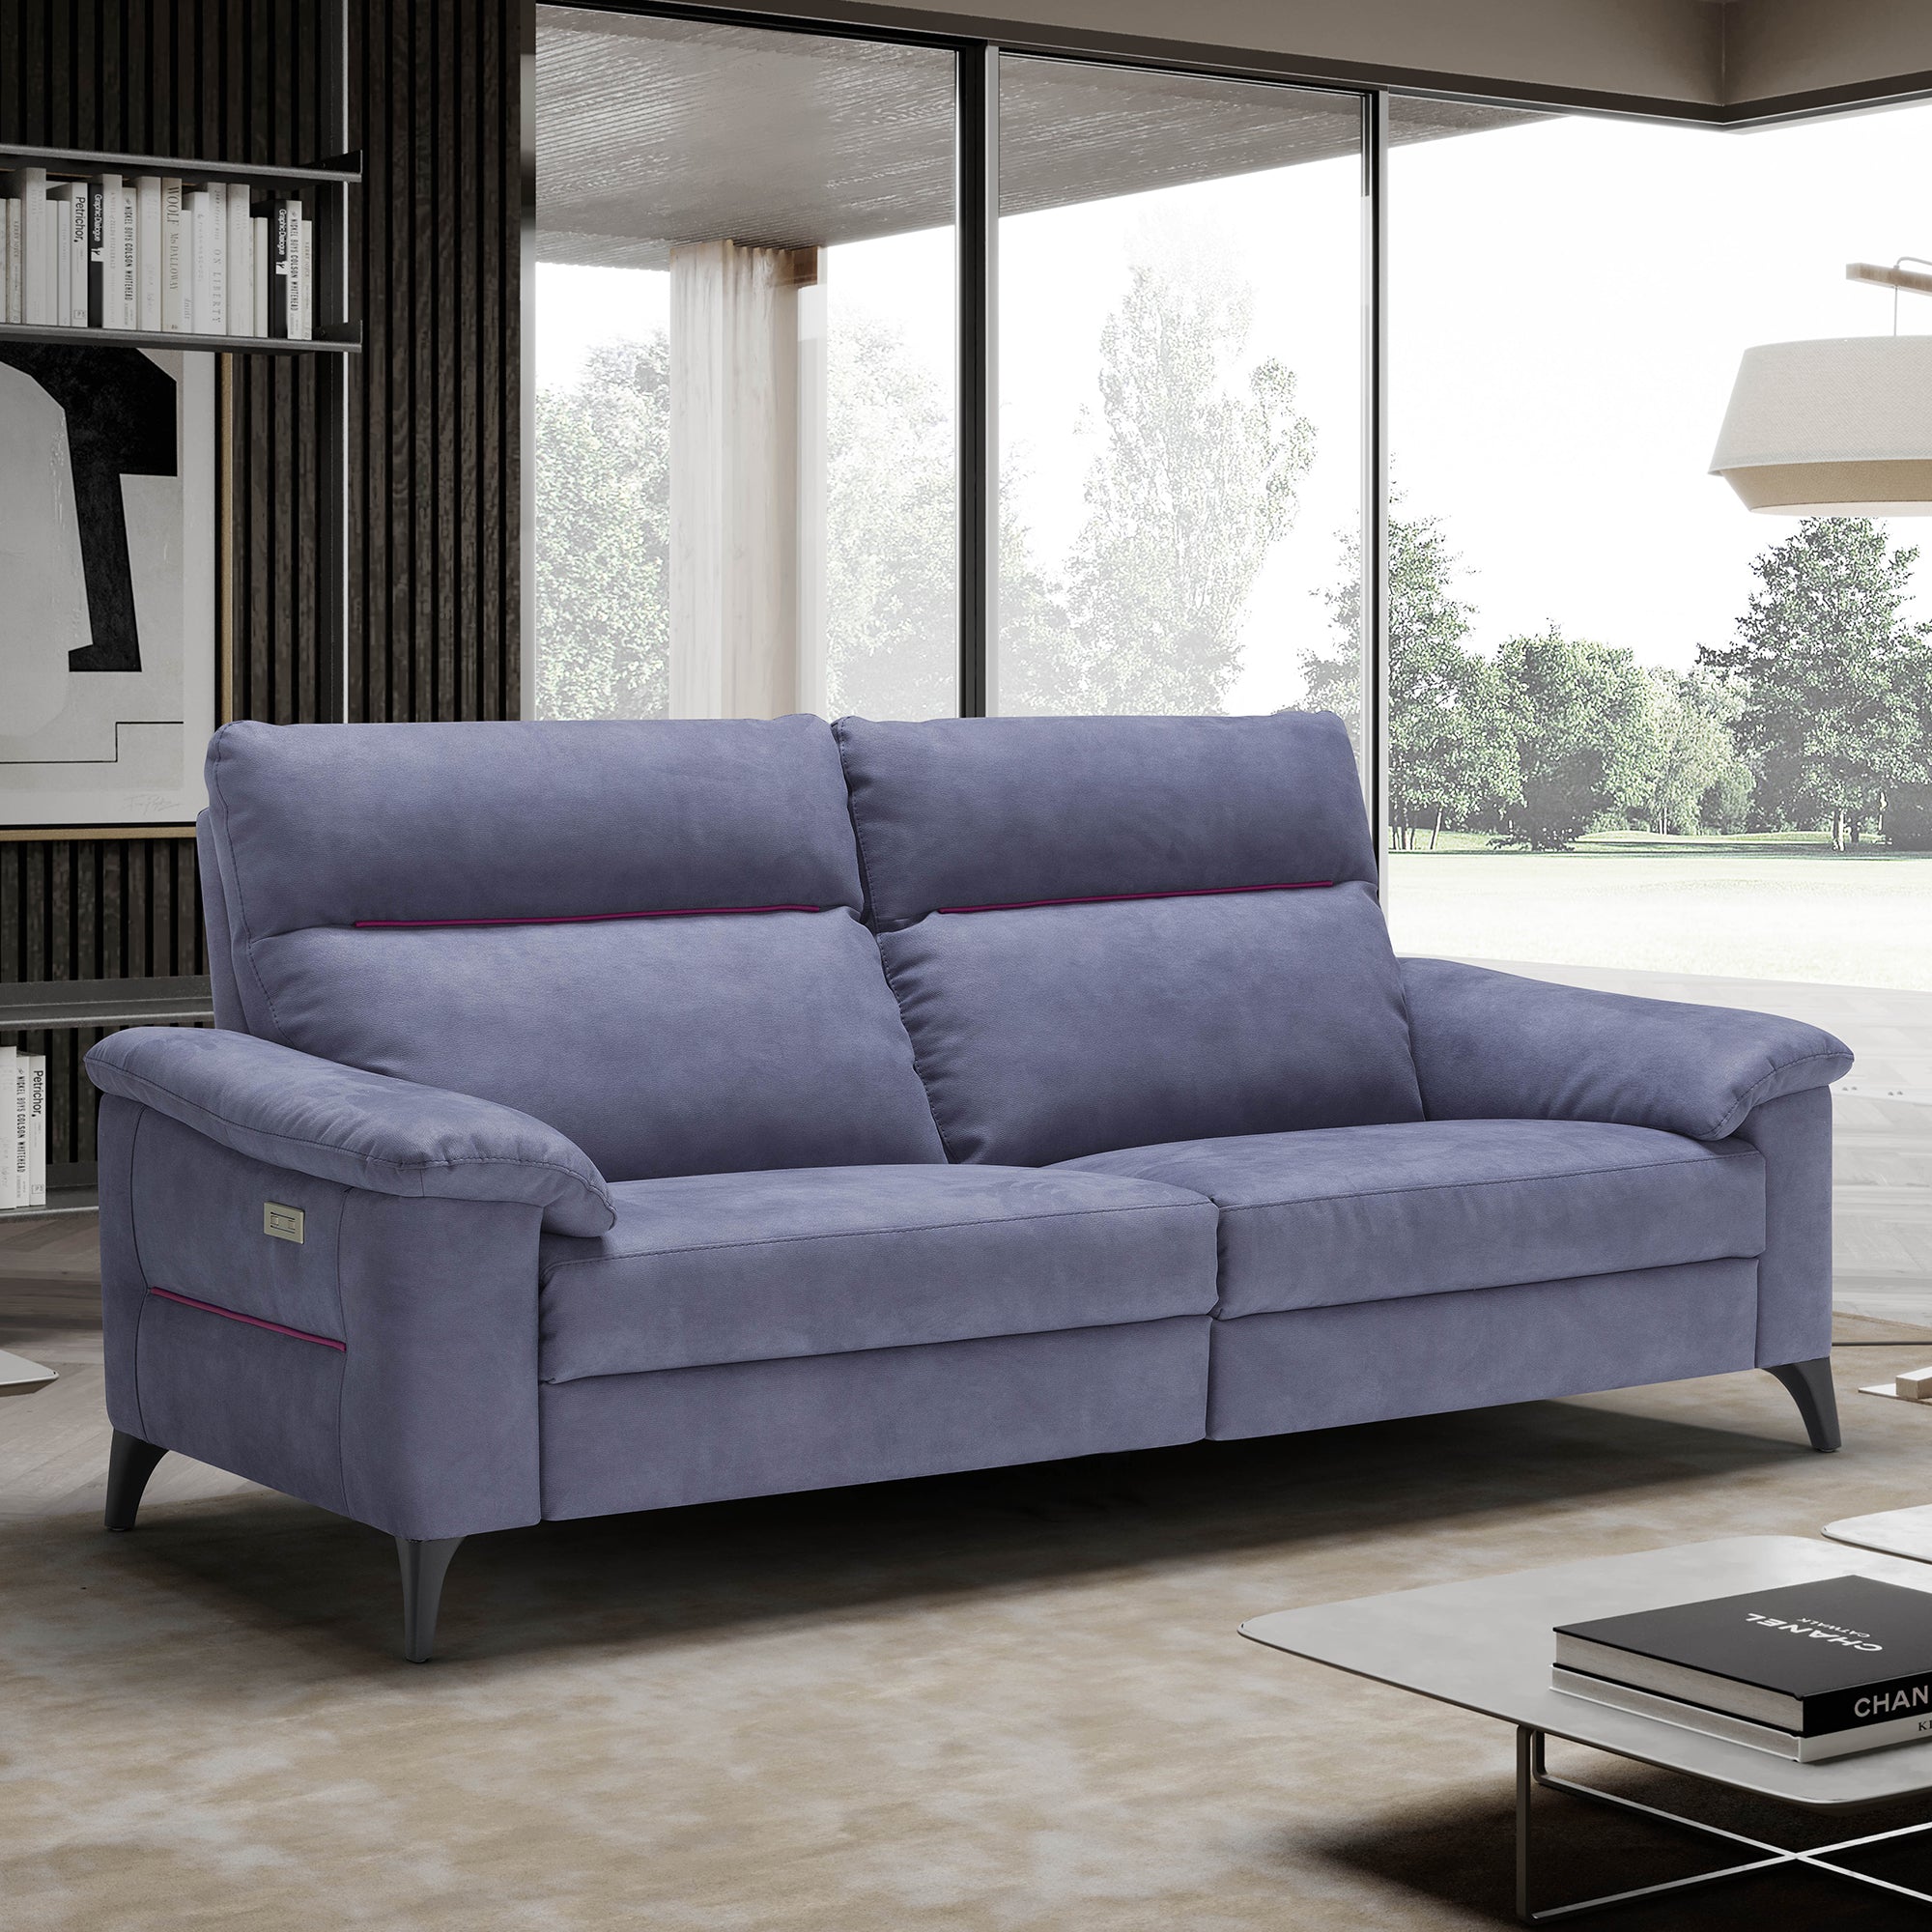 Treviso - 3 Seat Large Sofa In Fabric Or Leather Microfibre